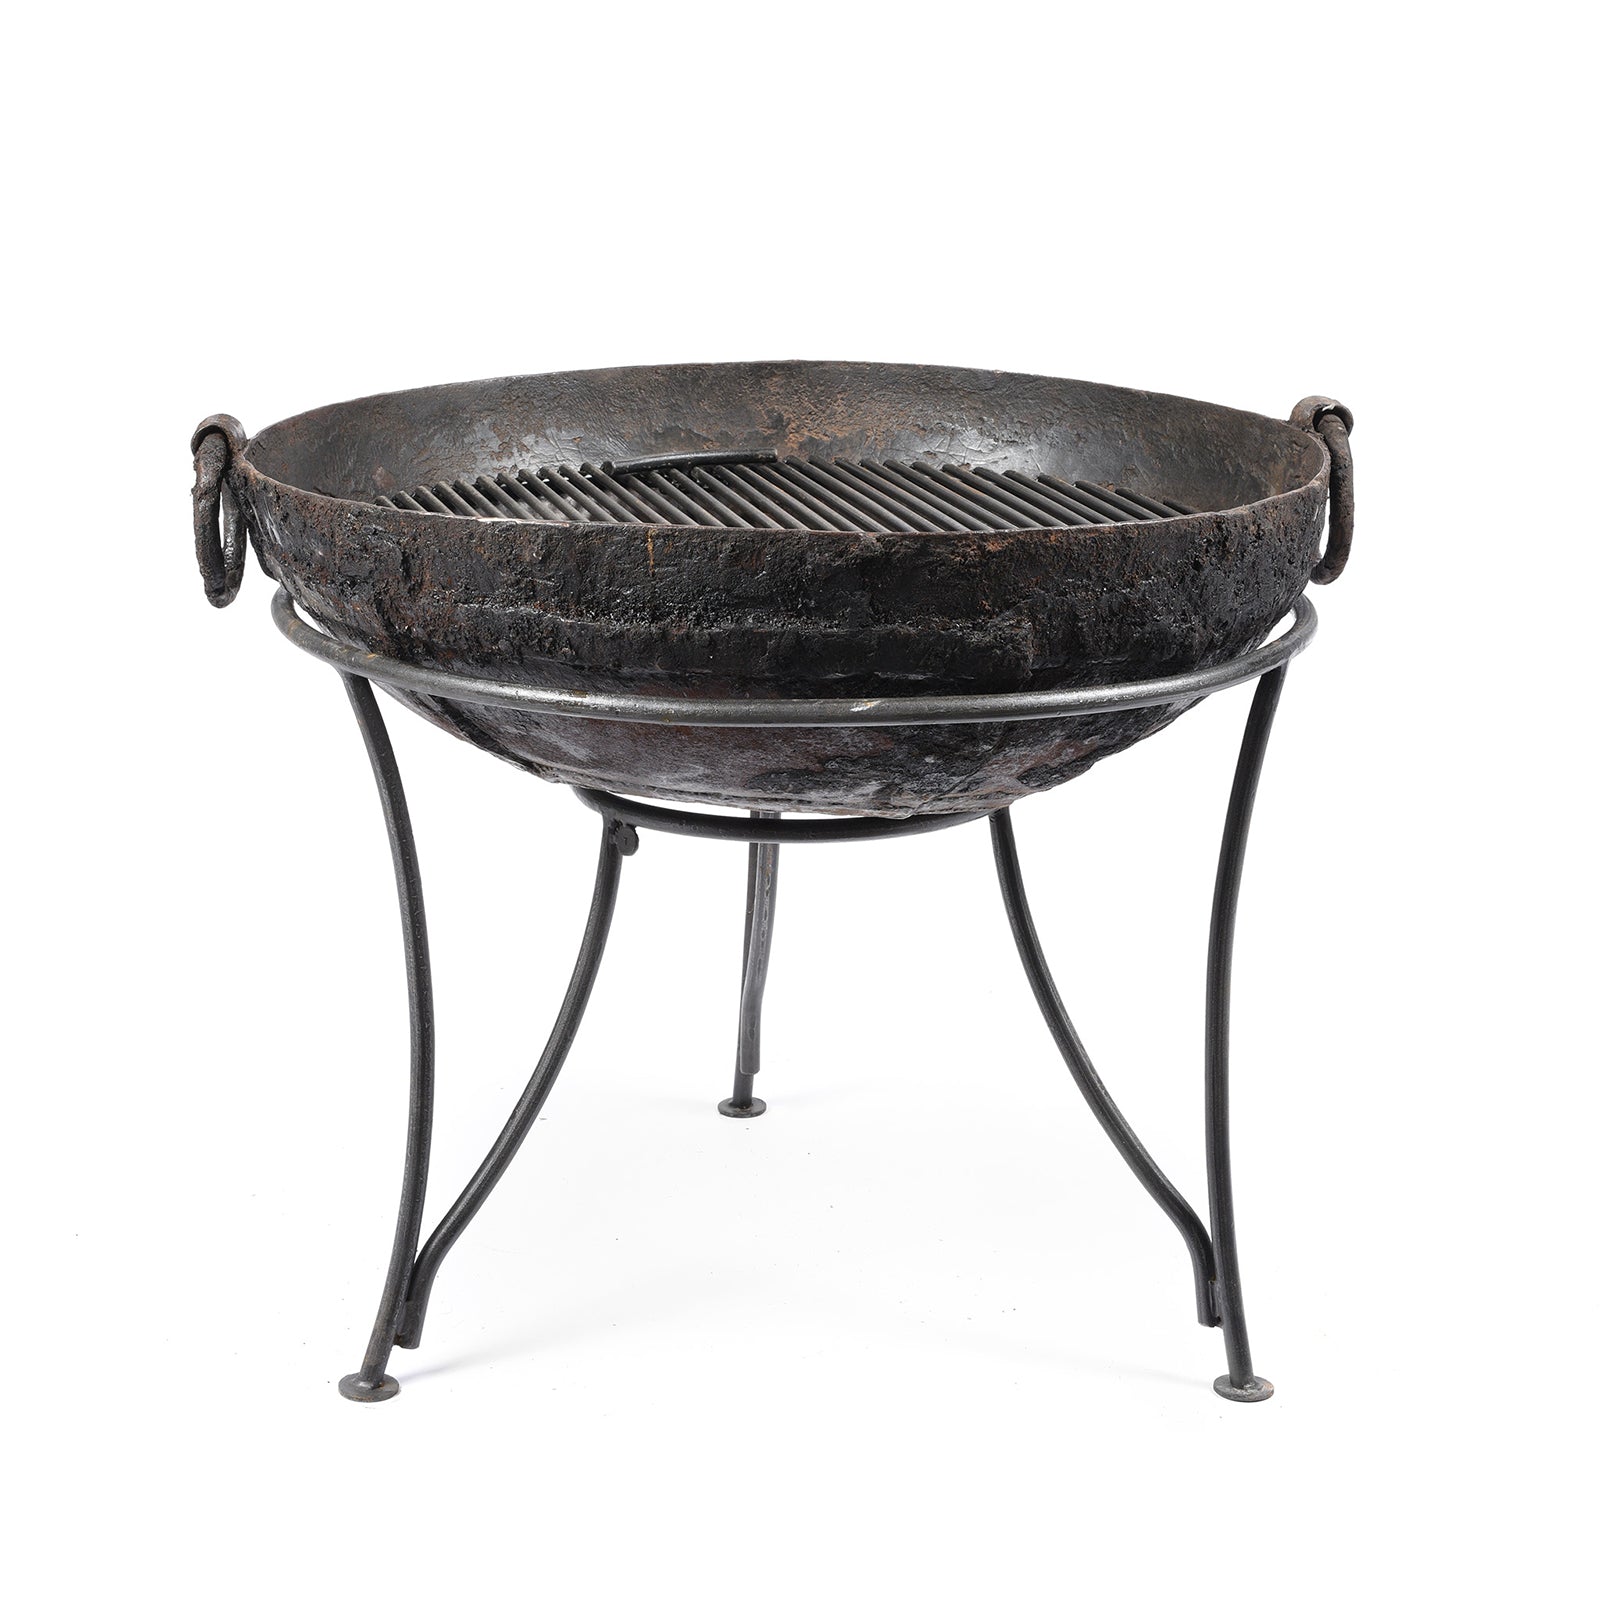 Old 'Kadai' - Indian Fire Bowl On Stand From Rajasthan - Ca 1920 | Indigo Antiques